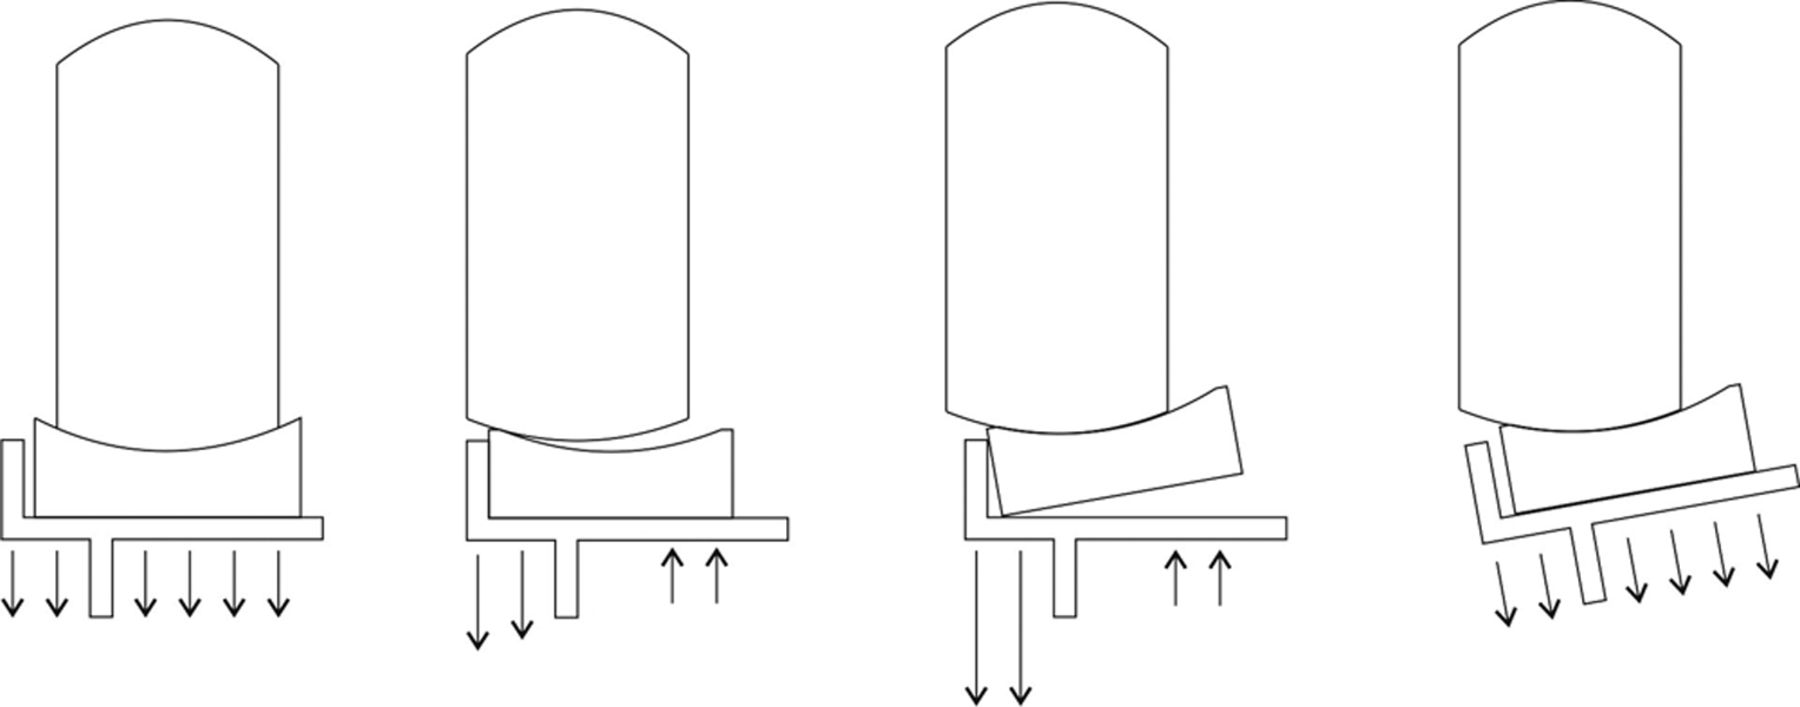 Fig. 4 
          Schematic demonstration of the possible
mechanism. From left to right: Normally-functioning cementless OUKR.
Relative lateralisation of the femur on the tibia causes the bearing
to abut the lateral tibial wall. The femoral component subluxes
on the bearing, and the bearing may tip in response. In this situation,
the forces lateral to the keel become very large and there may be
tension at the interface medially. As a result, the tibia subsides
into valgus, in which case, the bearing will move away from the
wall, normalising the loads beneath the tray and allowing secondary
fixation.
        